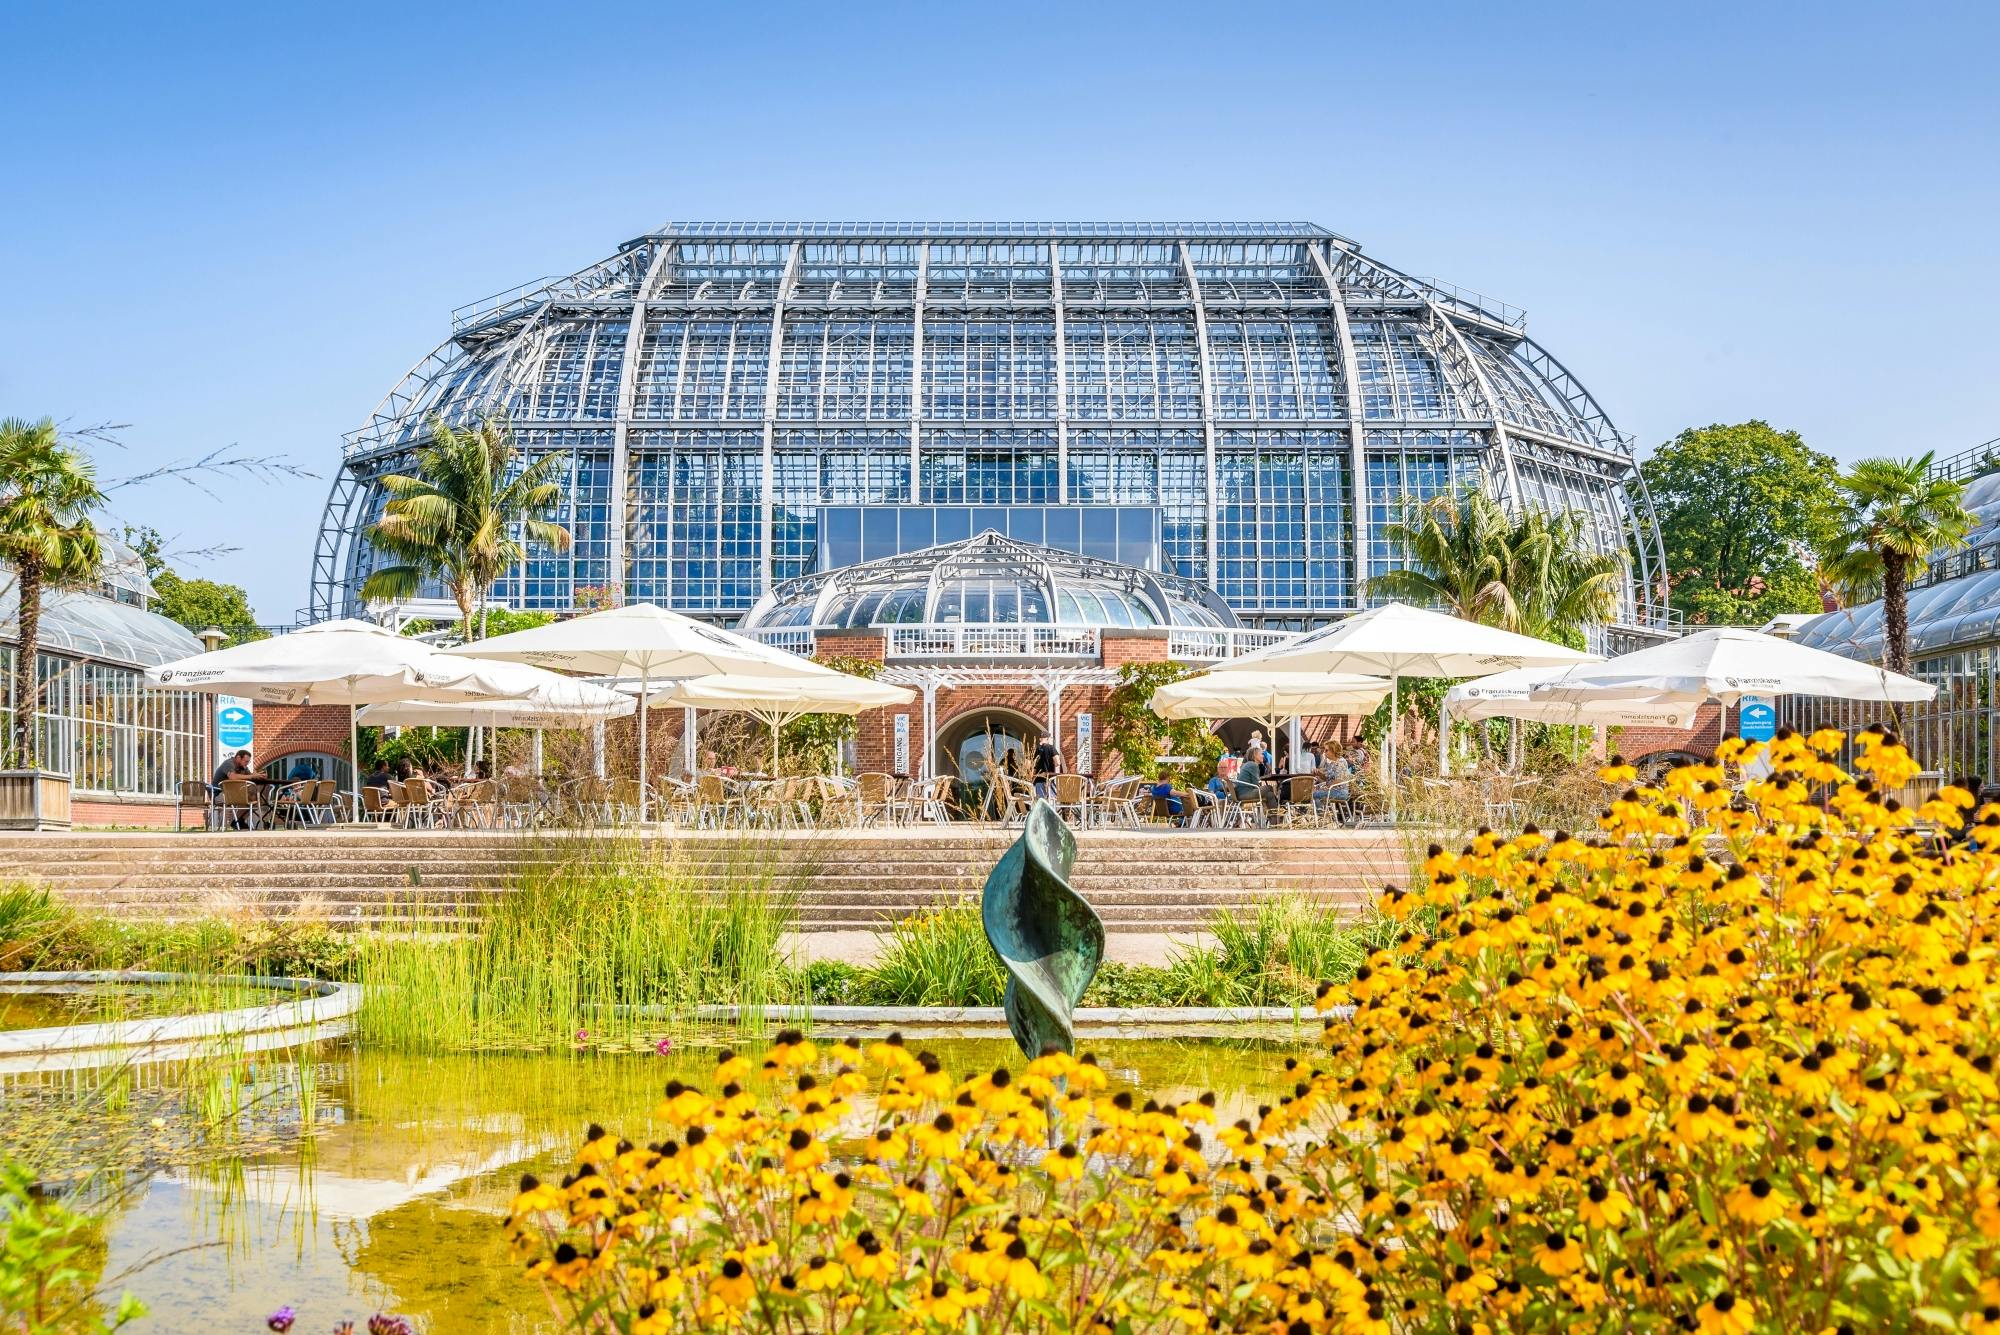 Botanic Garden of Berlin E-Ticket with Self-Guided Audio Tour